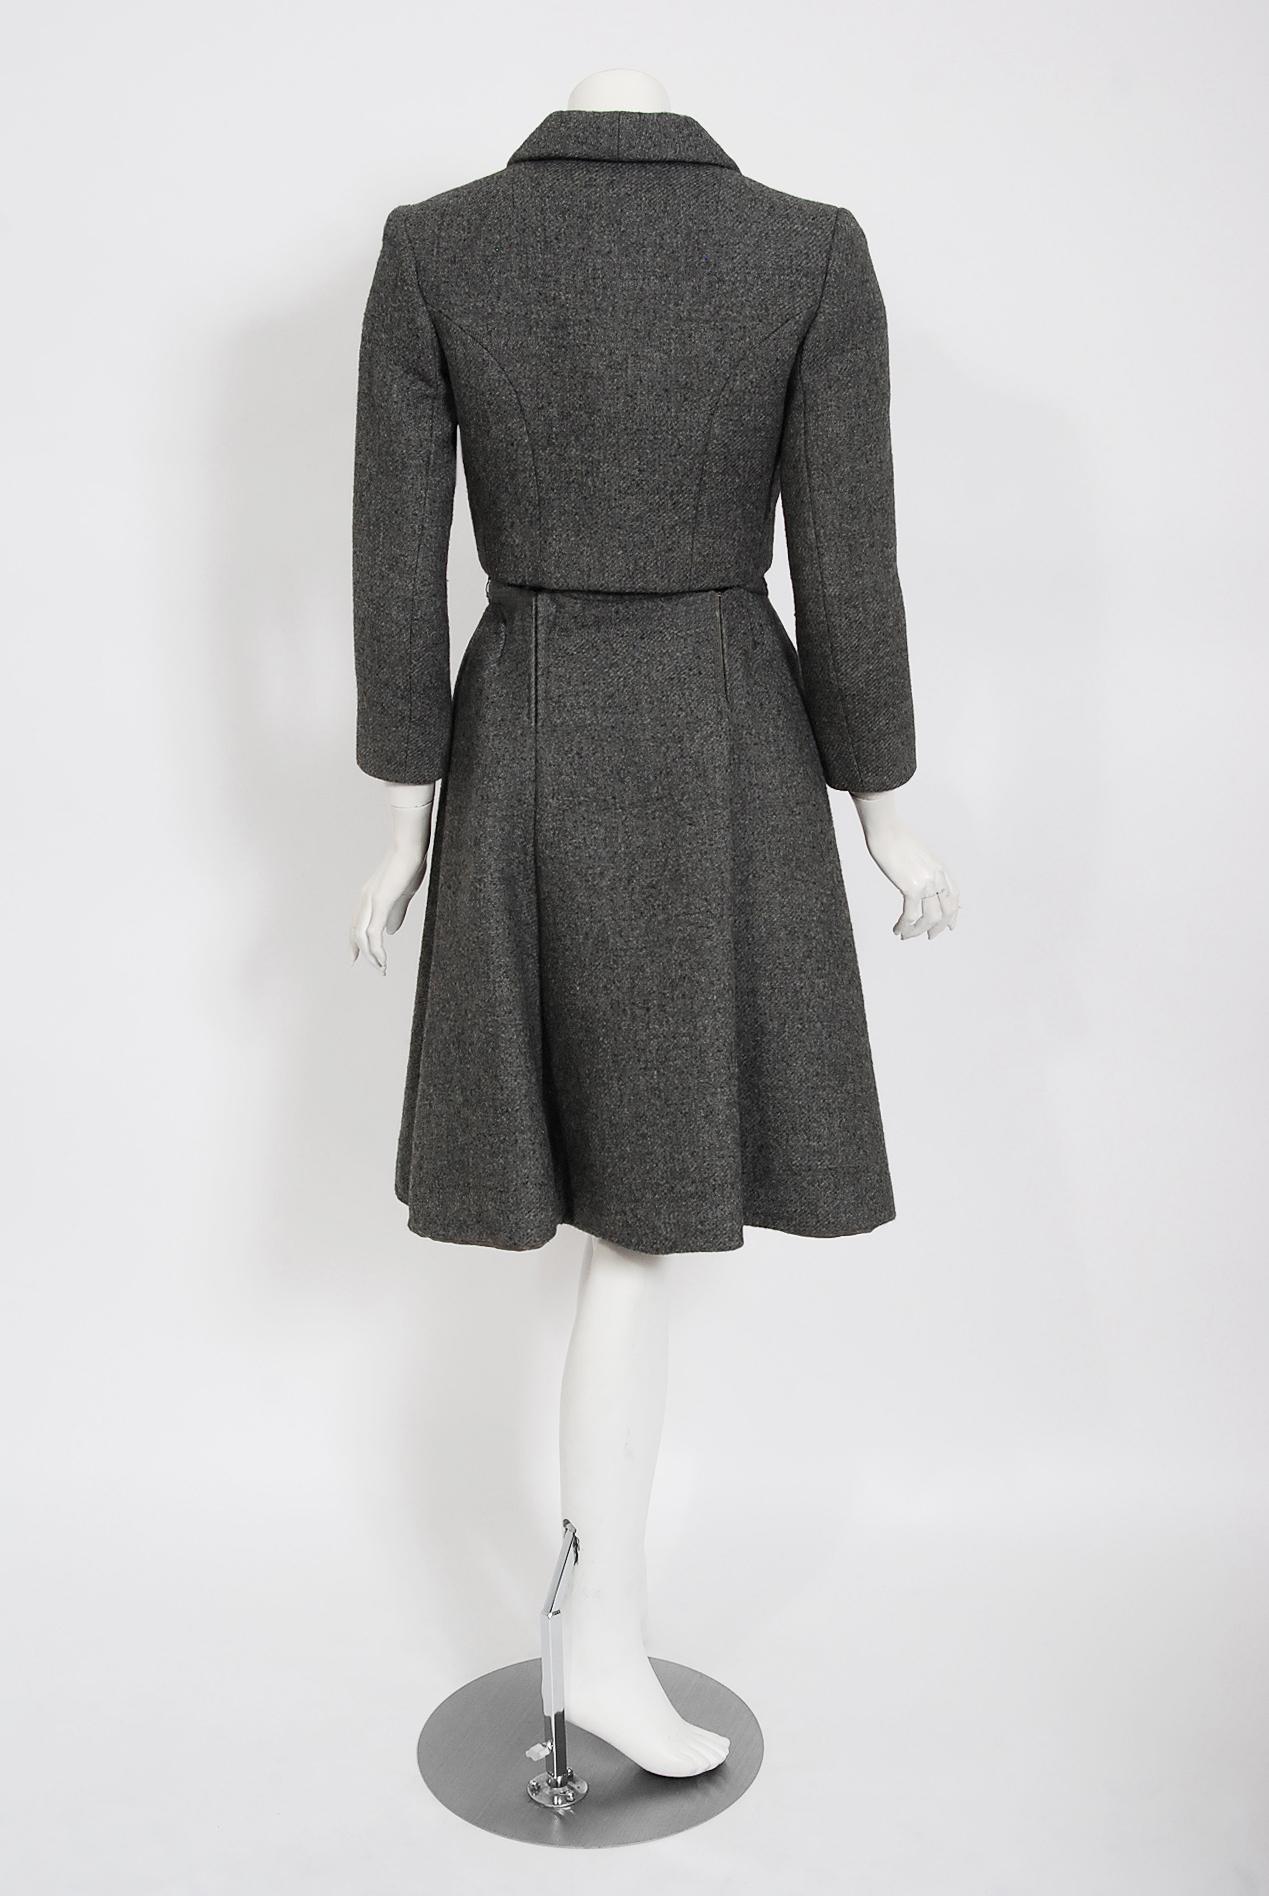 Vintage 1964 Norman Norell Documented Gray Wool Dress w/ Double-Breasted Jacket 7